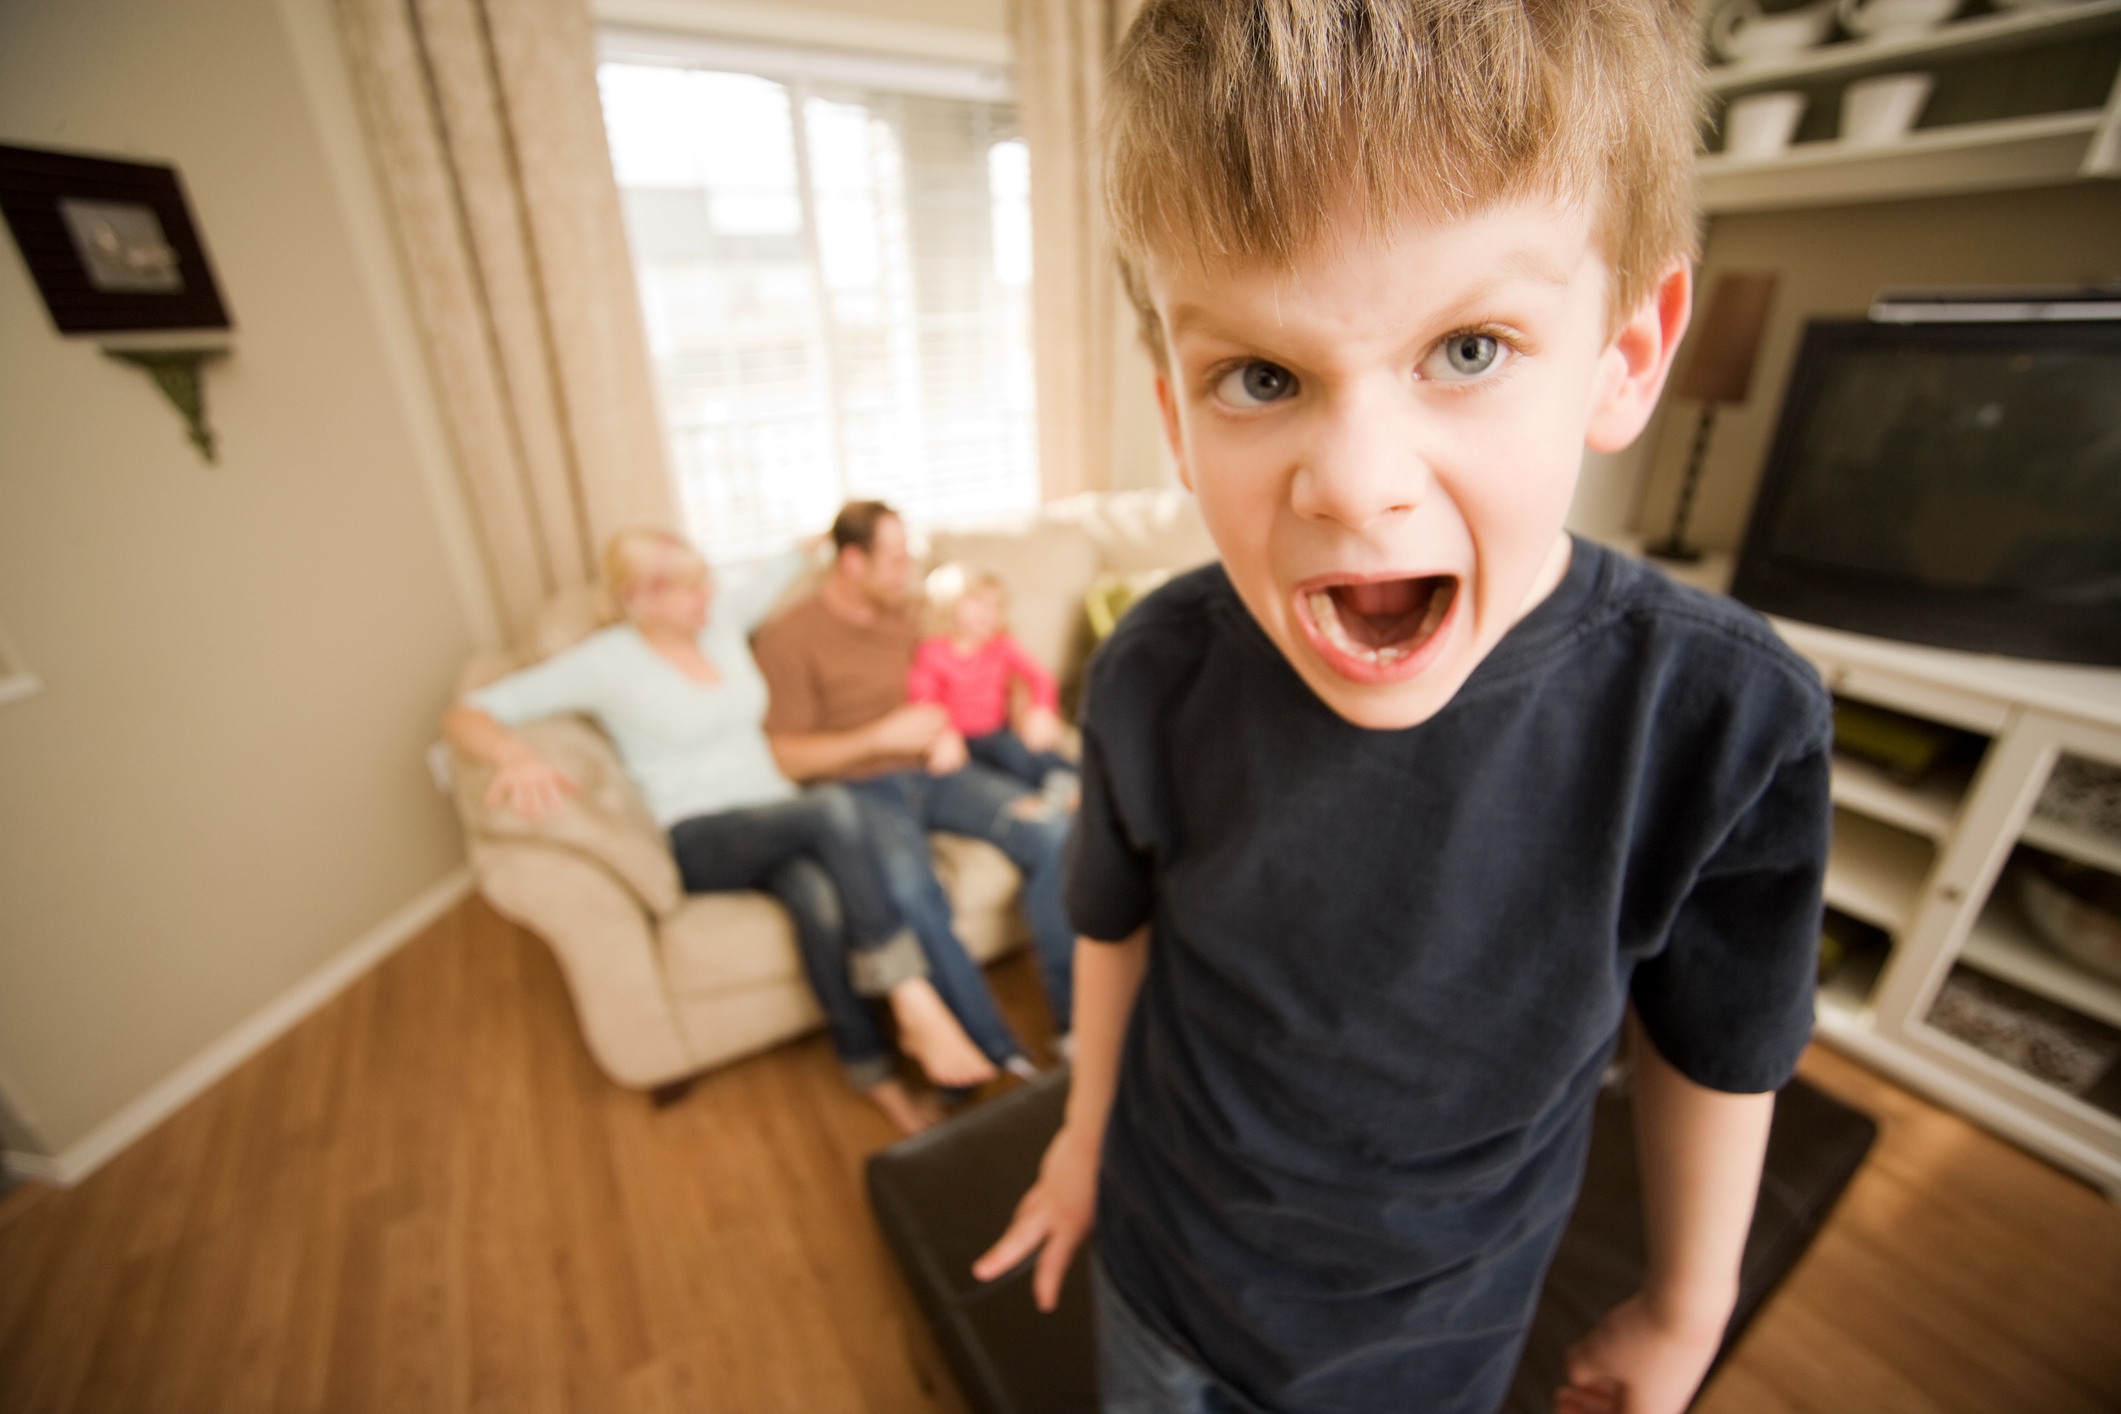 Young boy with mouth open in a playful roar, family in the background on a couch, indoors